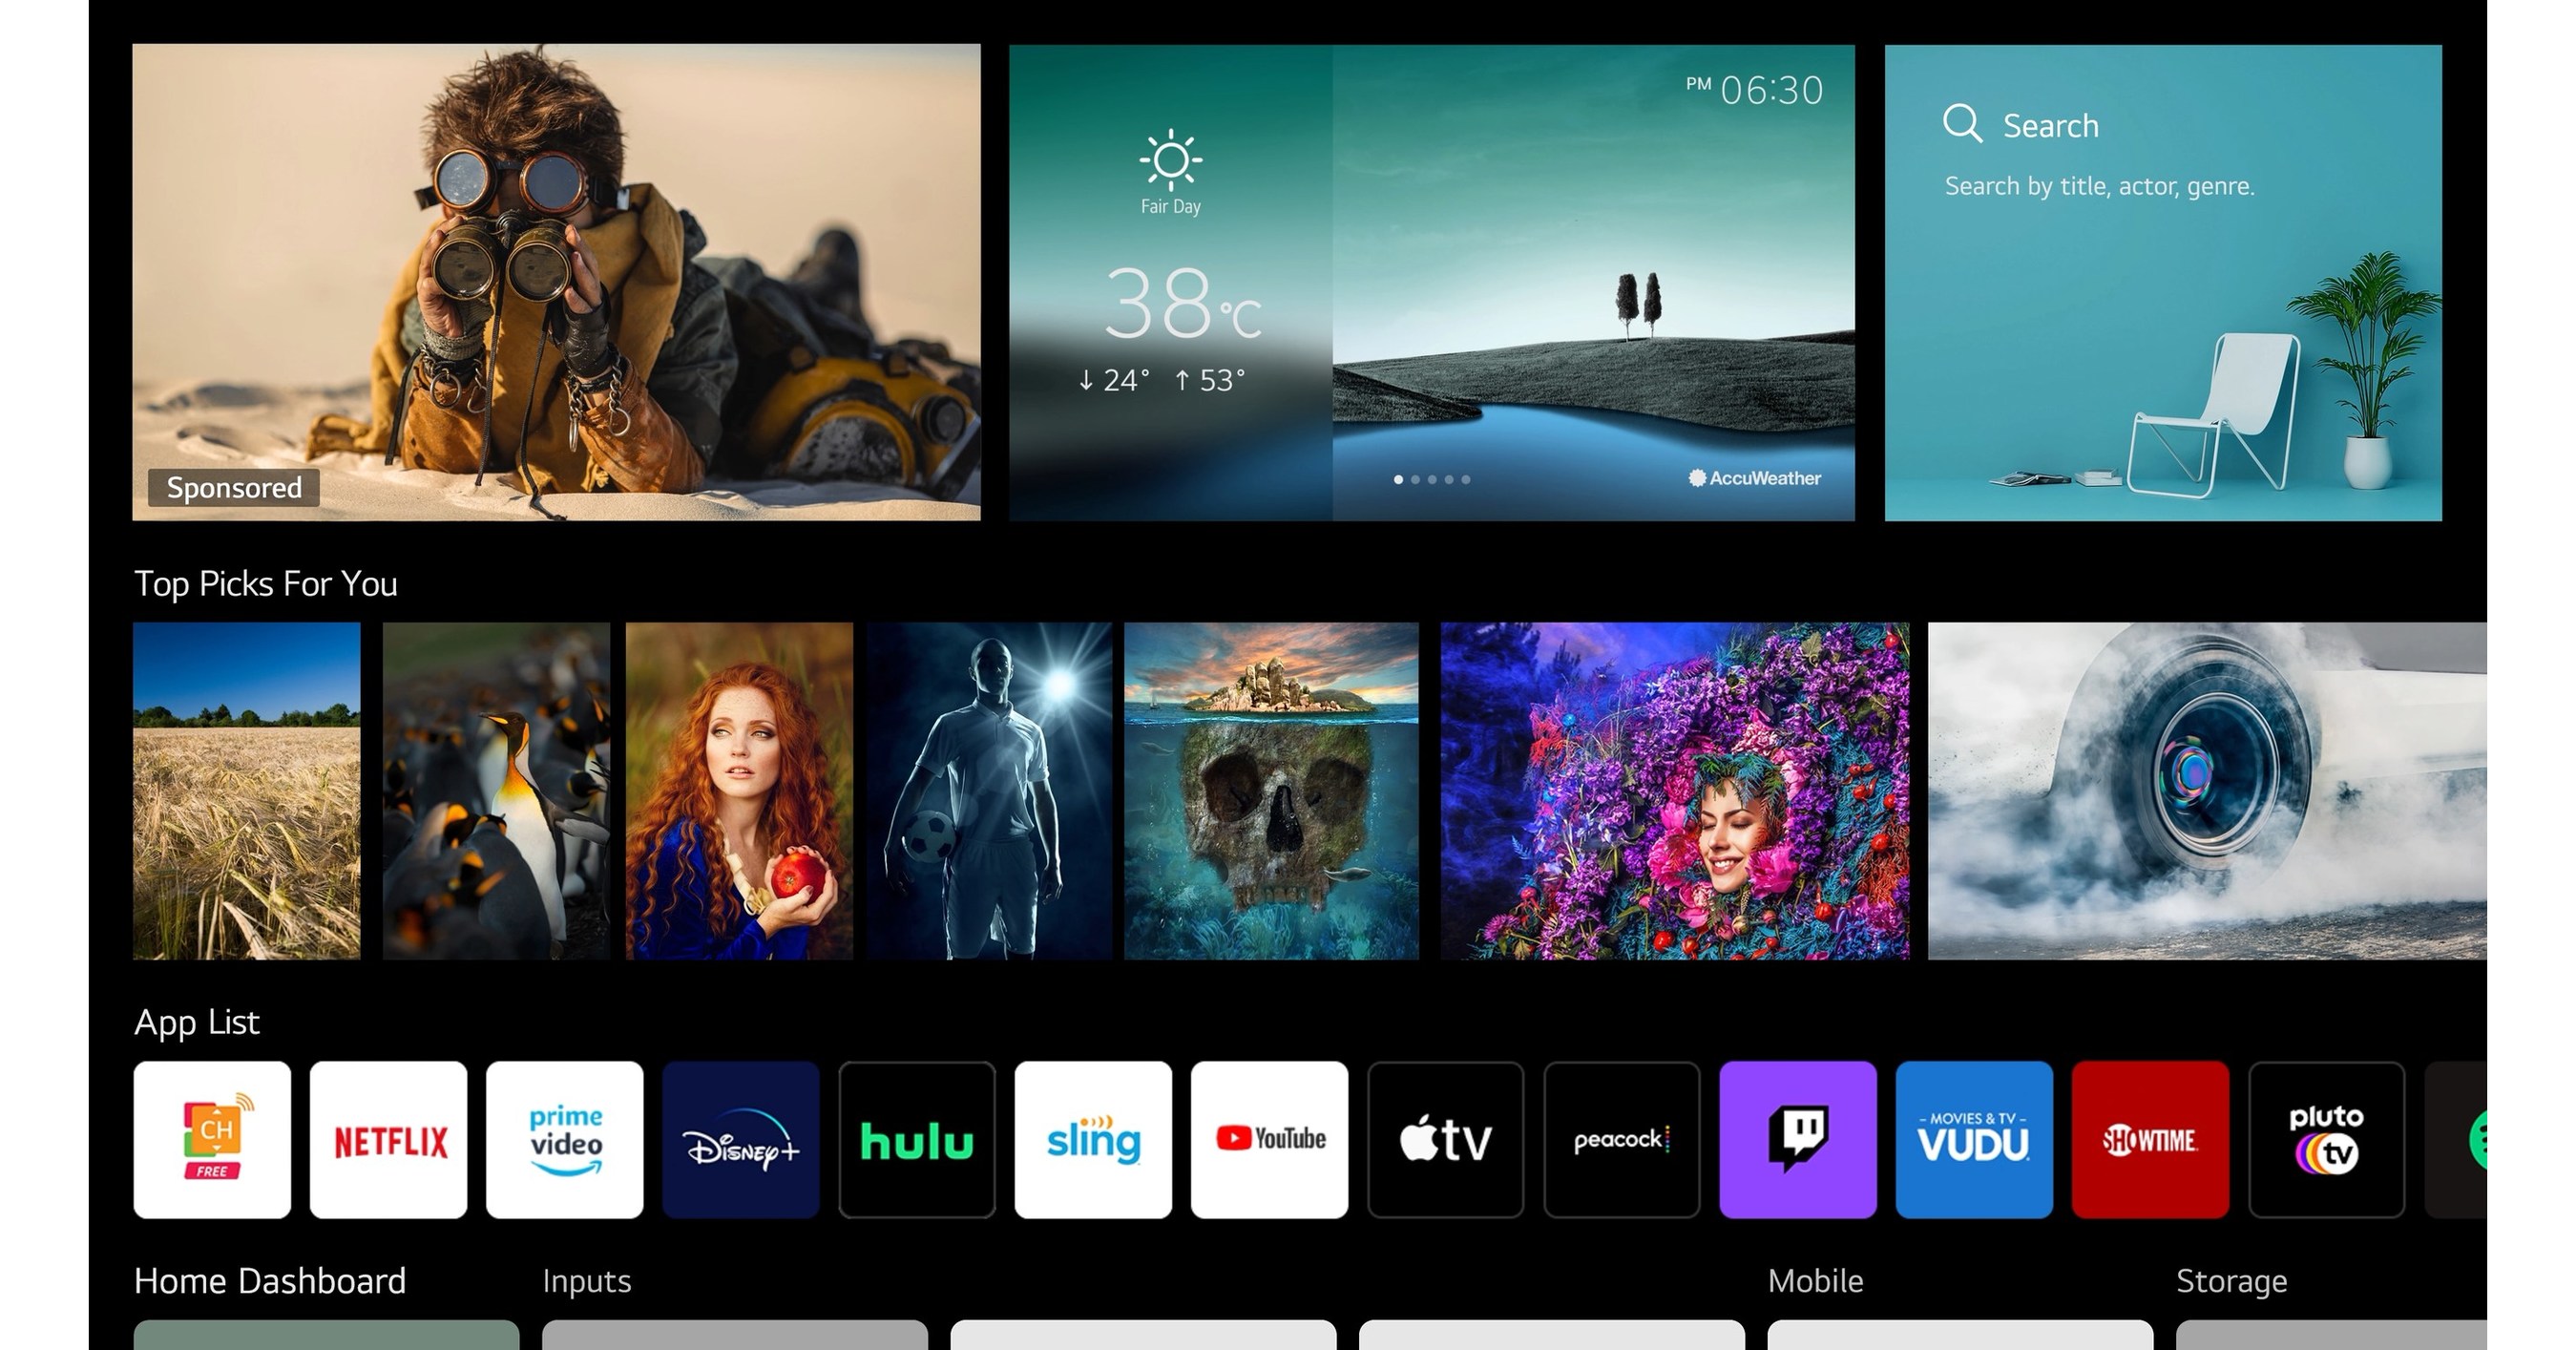 LG’s webOS 6.0 smart TV platform designed for the way viewers consume content today